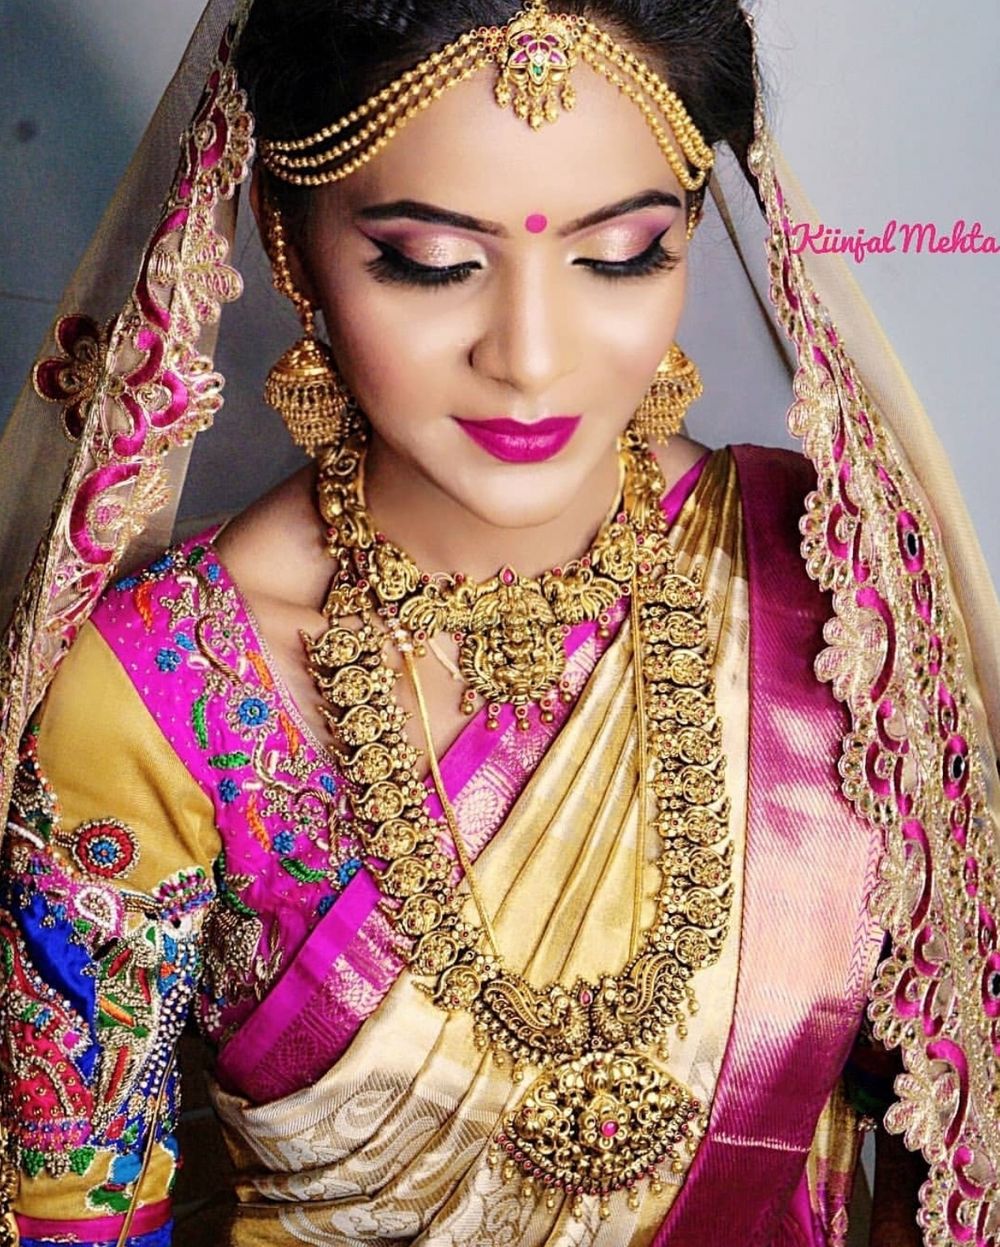 Photo From bride 4 - By Makeup & Hair by Kiinjal Mehta